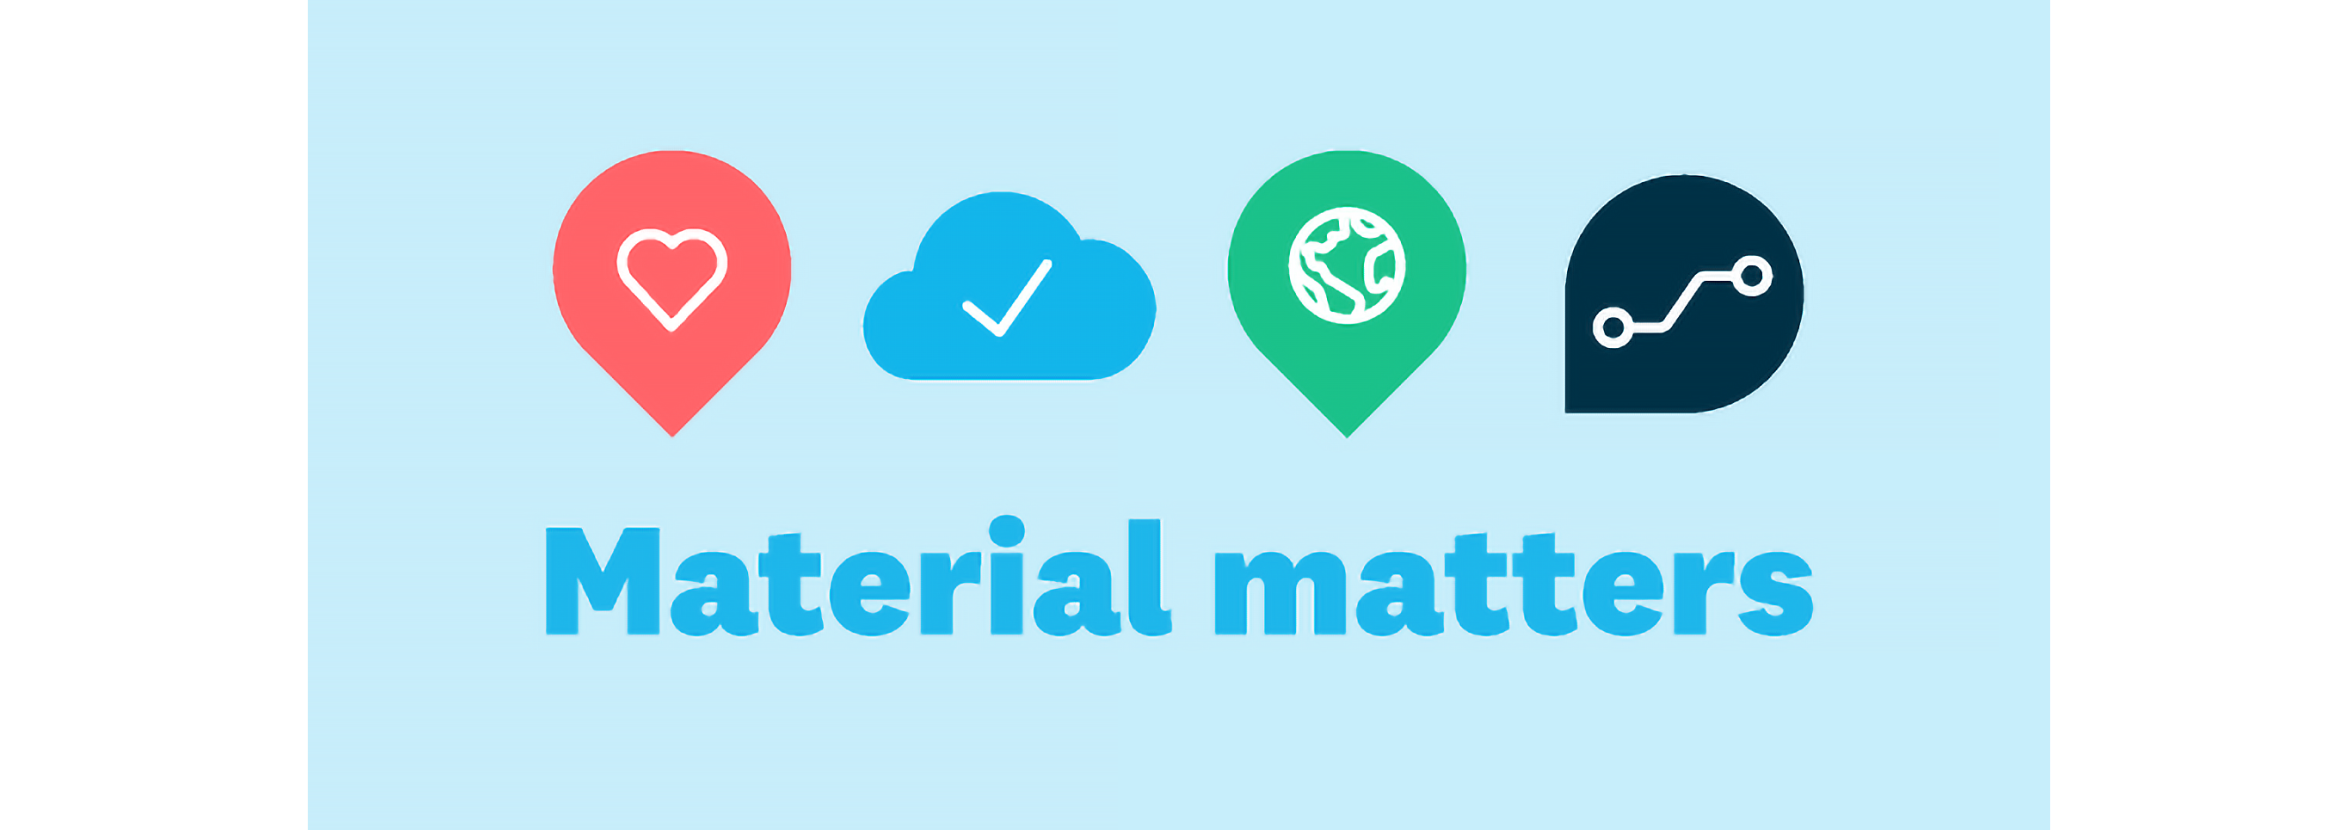 Icons of a heart, a cloud, a globe, and two connected points, with the words ‘Material matters’.